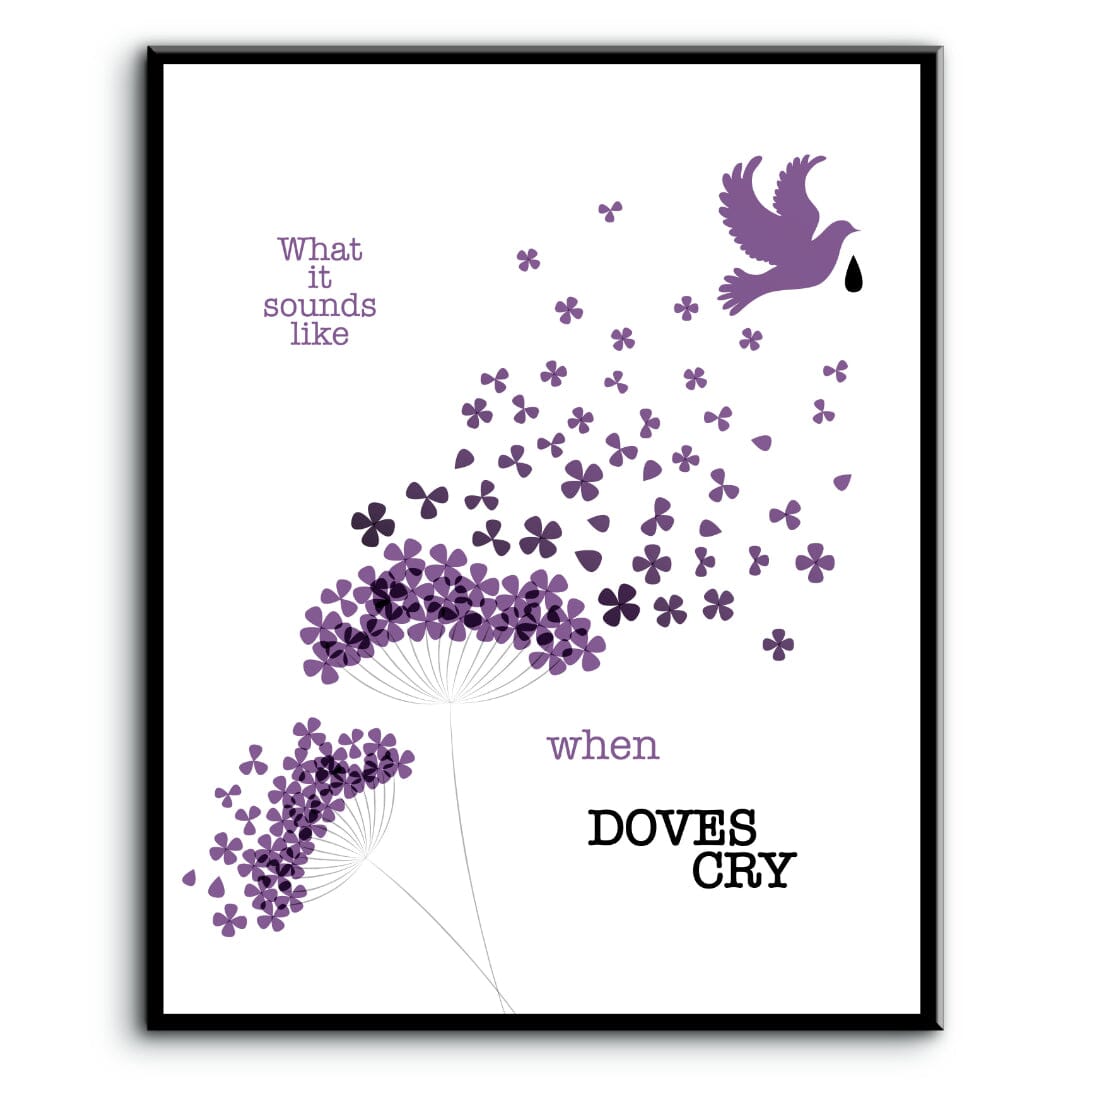 When Doves Cry by Prince - Song Lyrics Wall Art Print Poster Song Lyrics Art Song Lyrics Art 8x10 Plaque Mount 